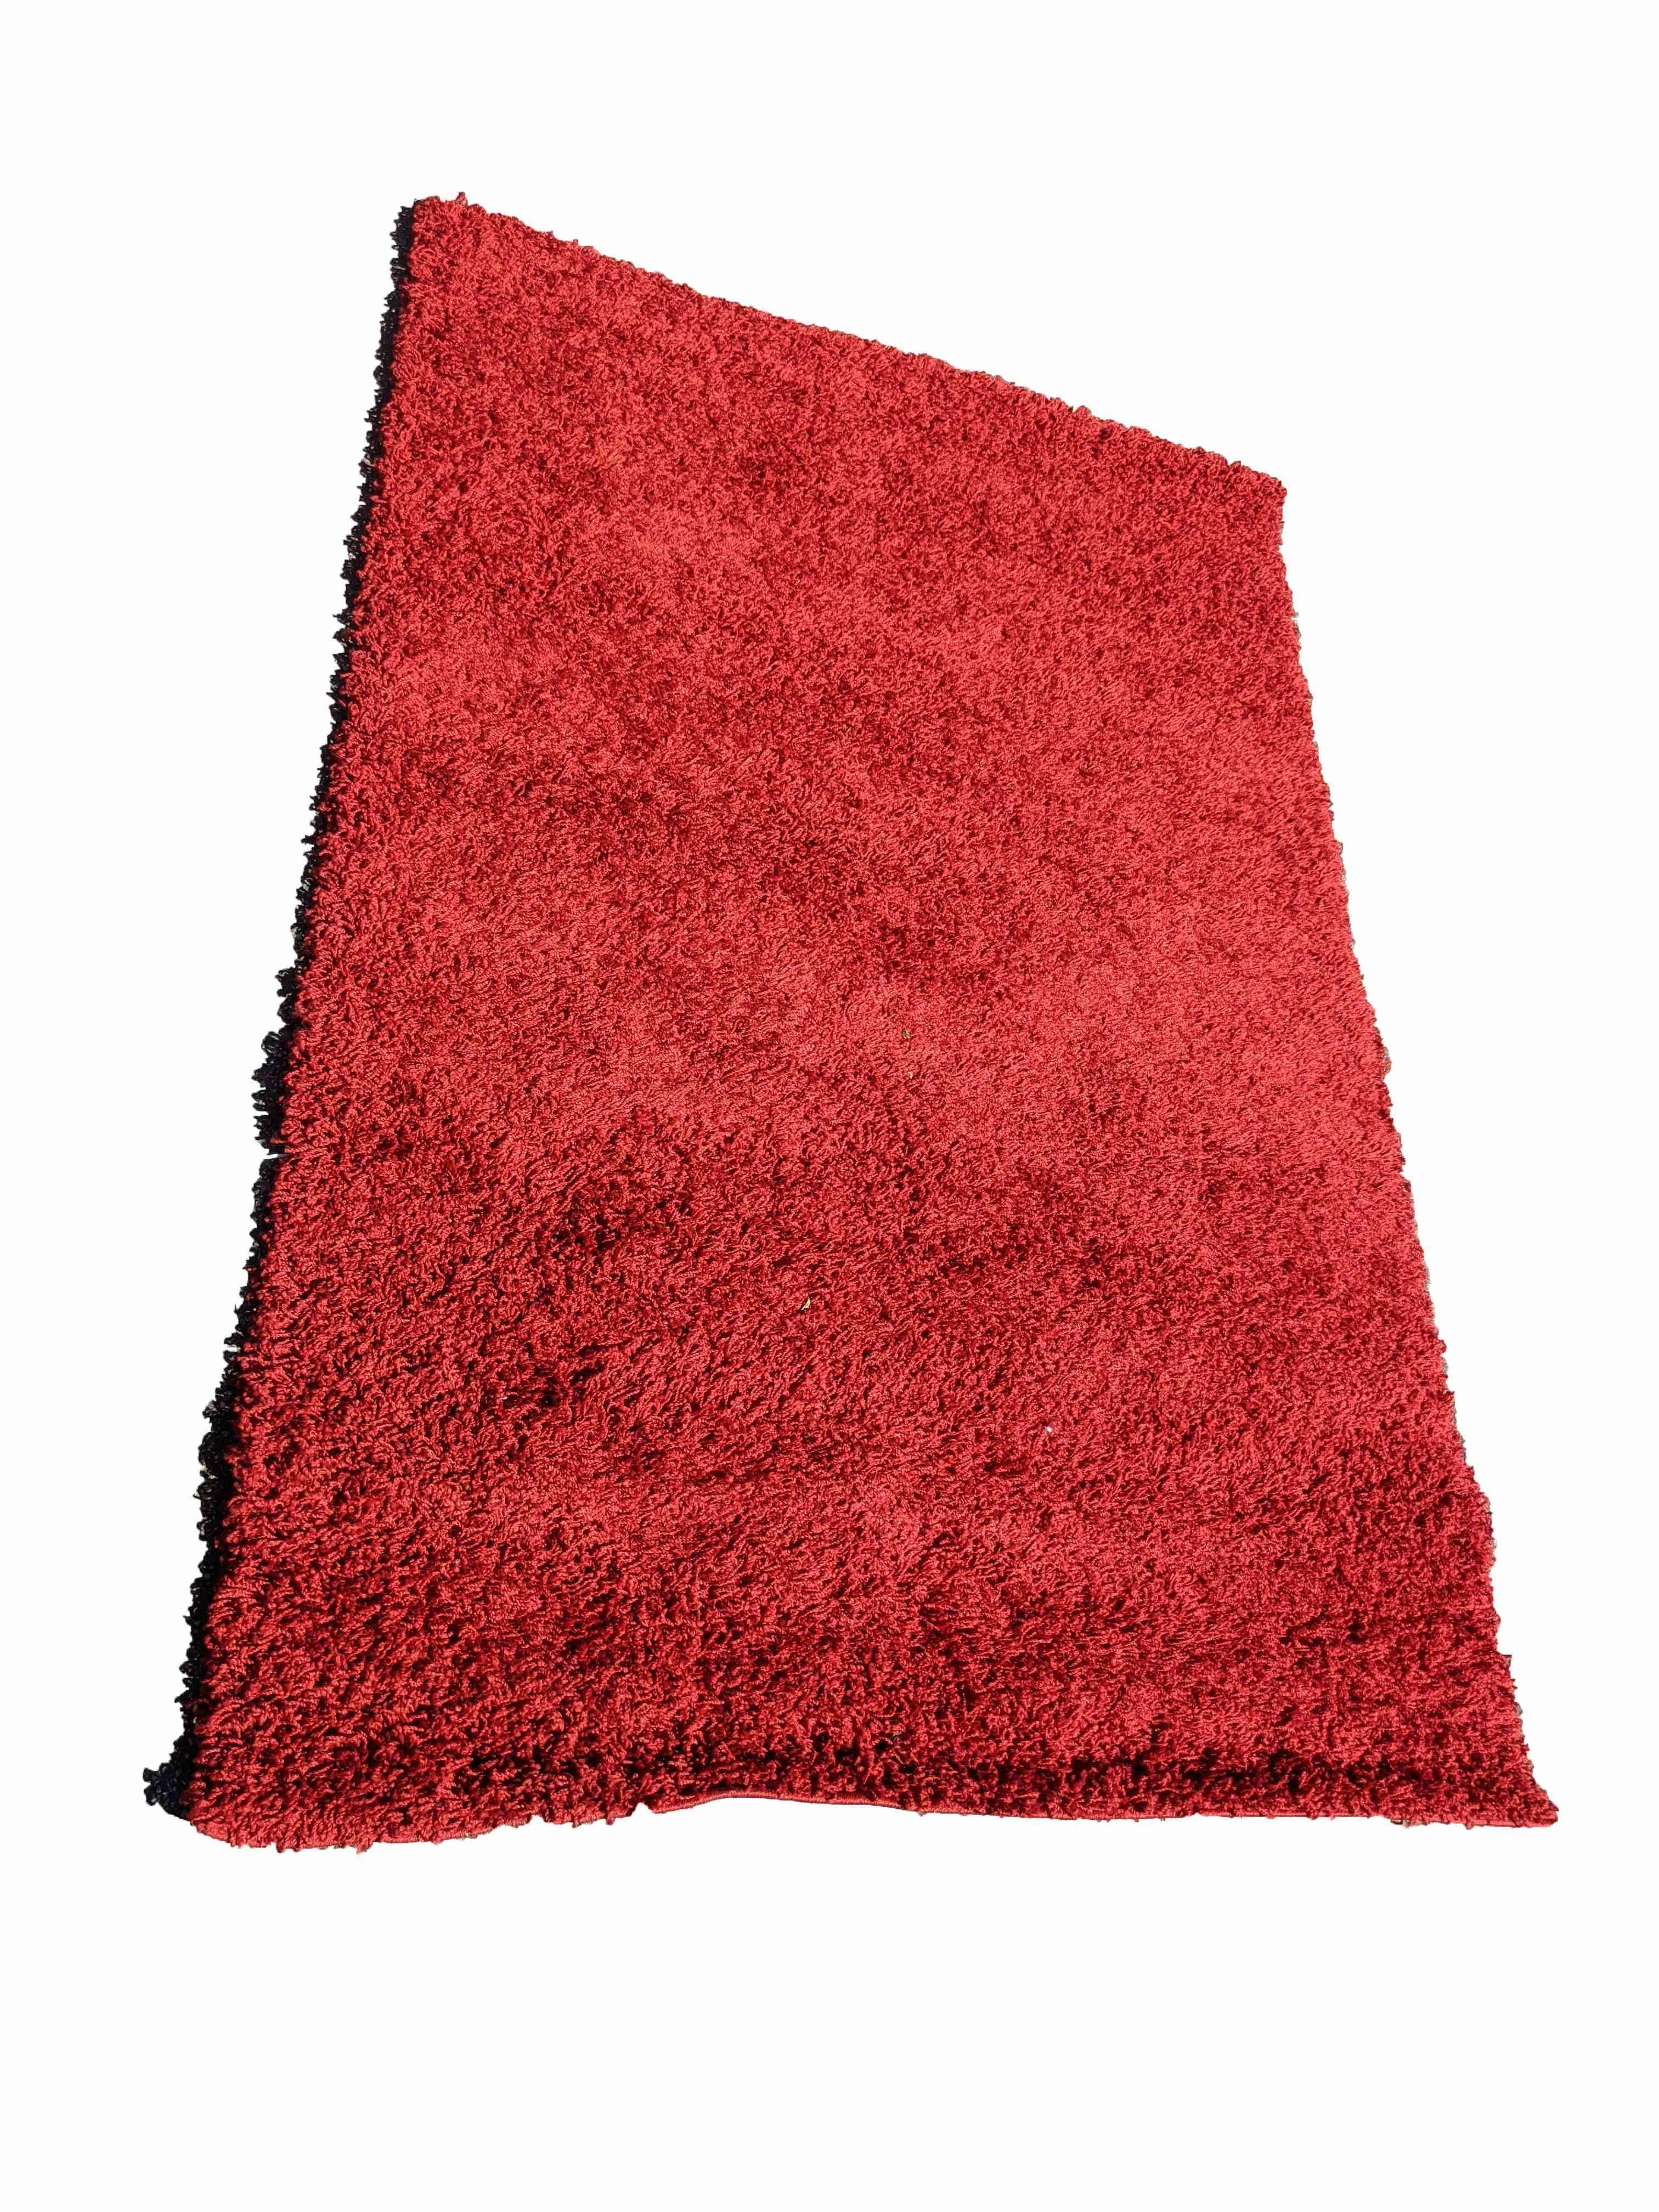 200 x 133 cm hand tufted shaggy Red Rug - Rugmaster